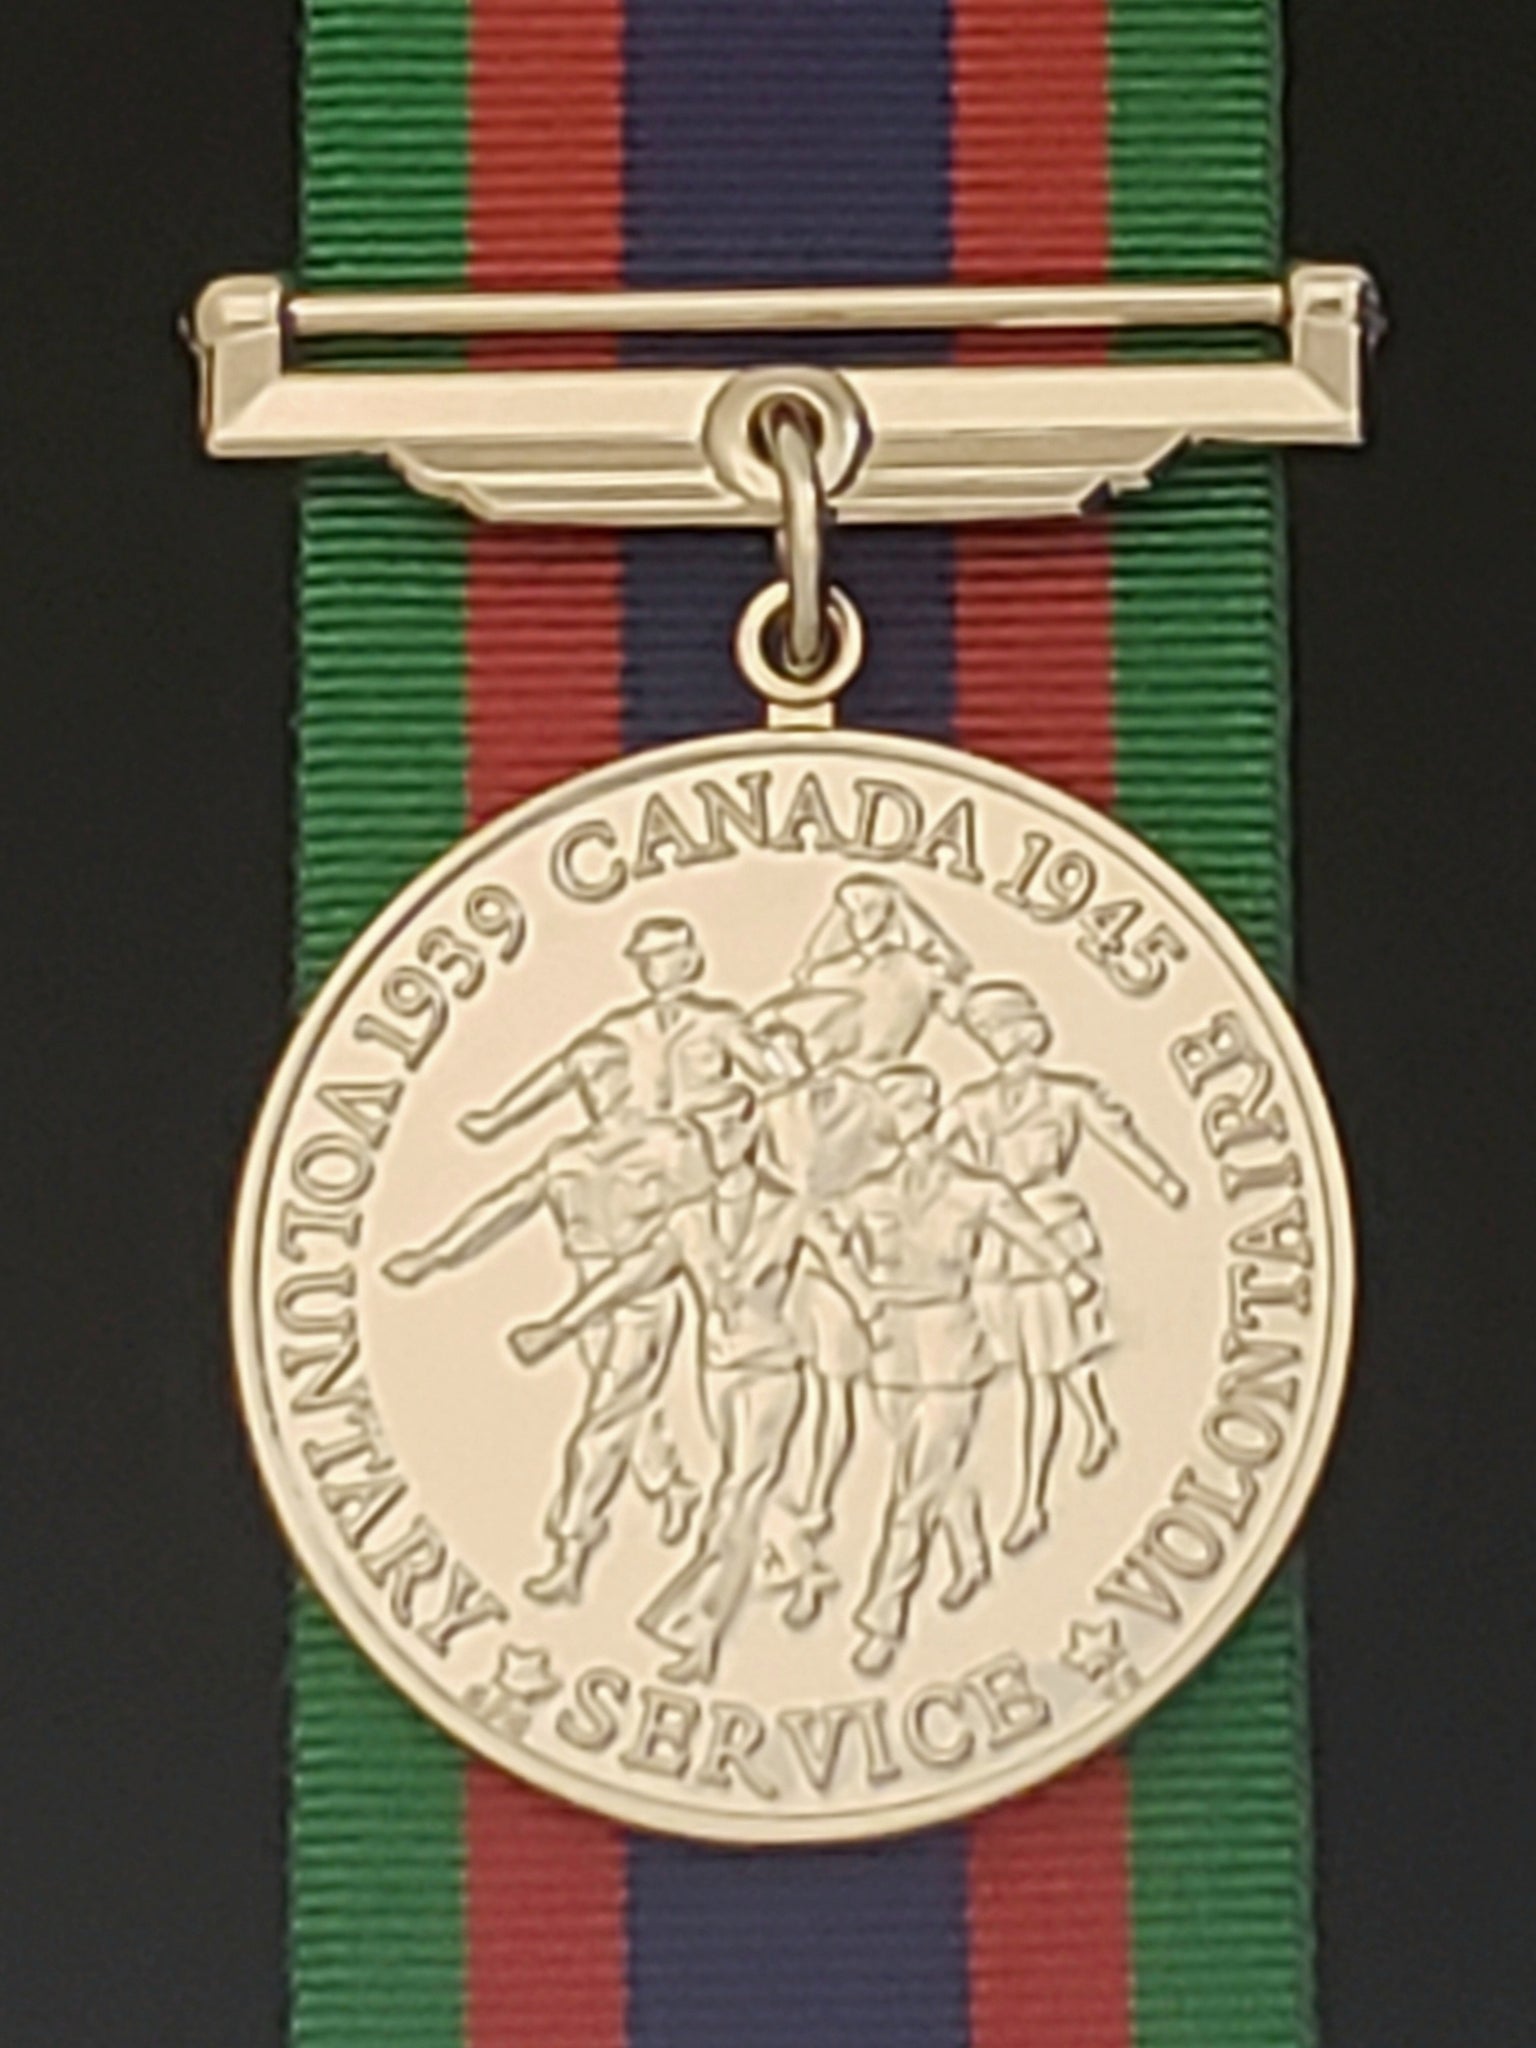 WW2 Canadian Volunteer Service Medal, Reproduction – Defence Medals Canada